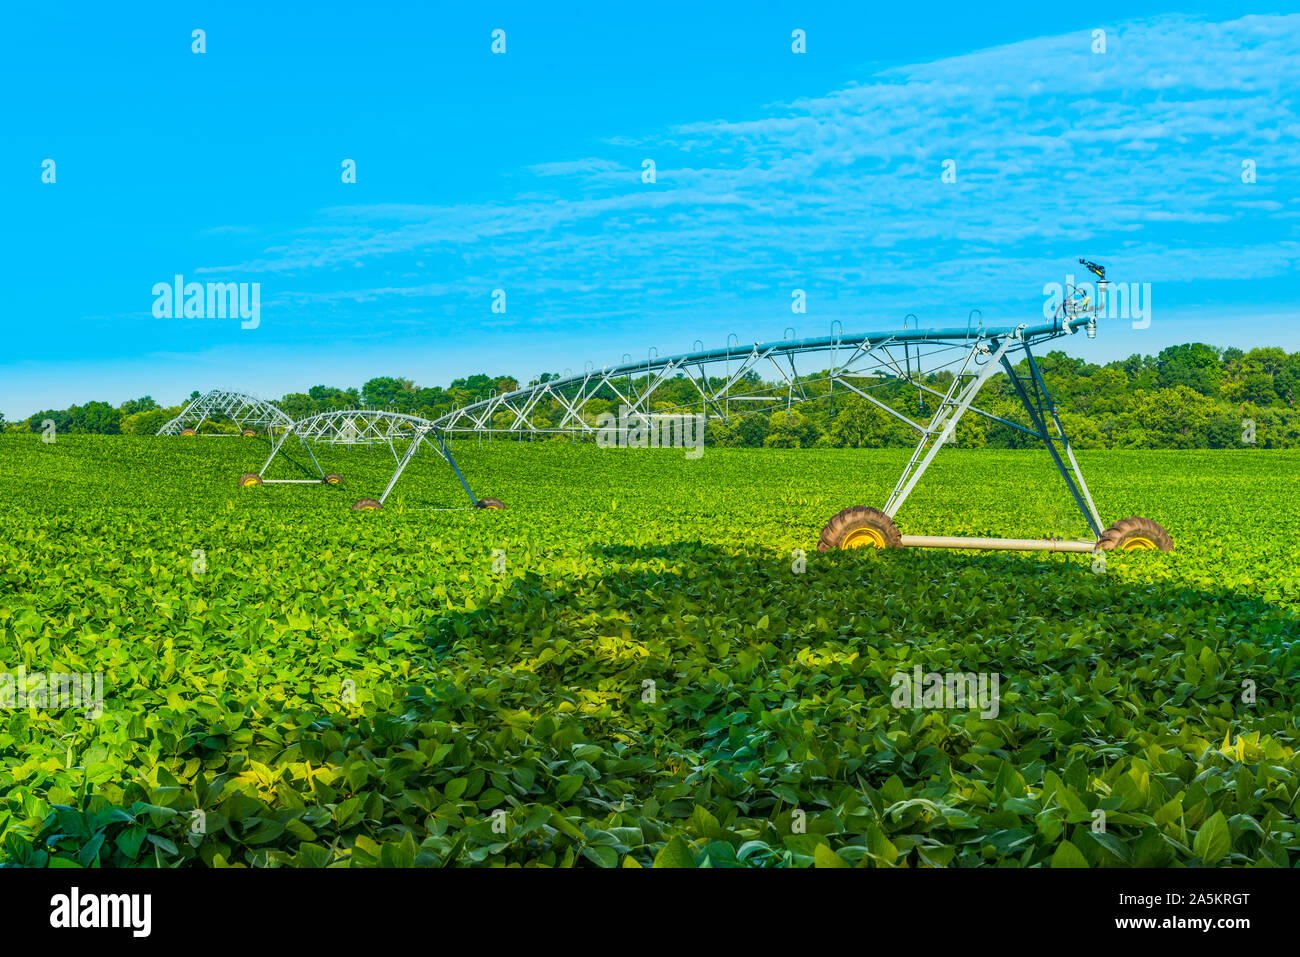 Irrigation System in a Field. Stock Photo